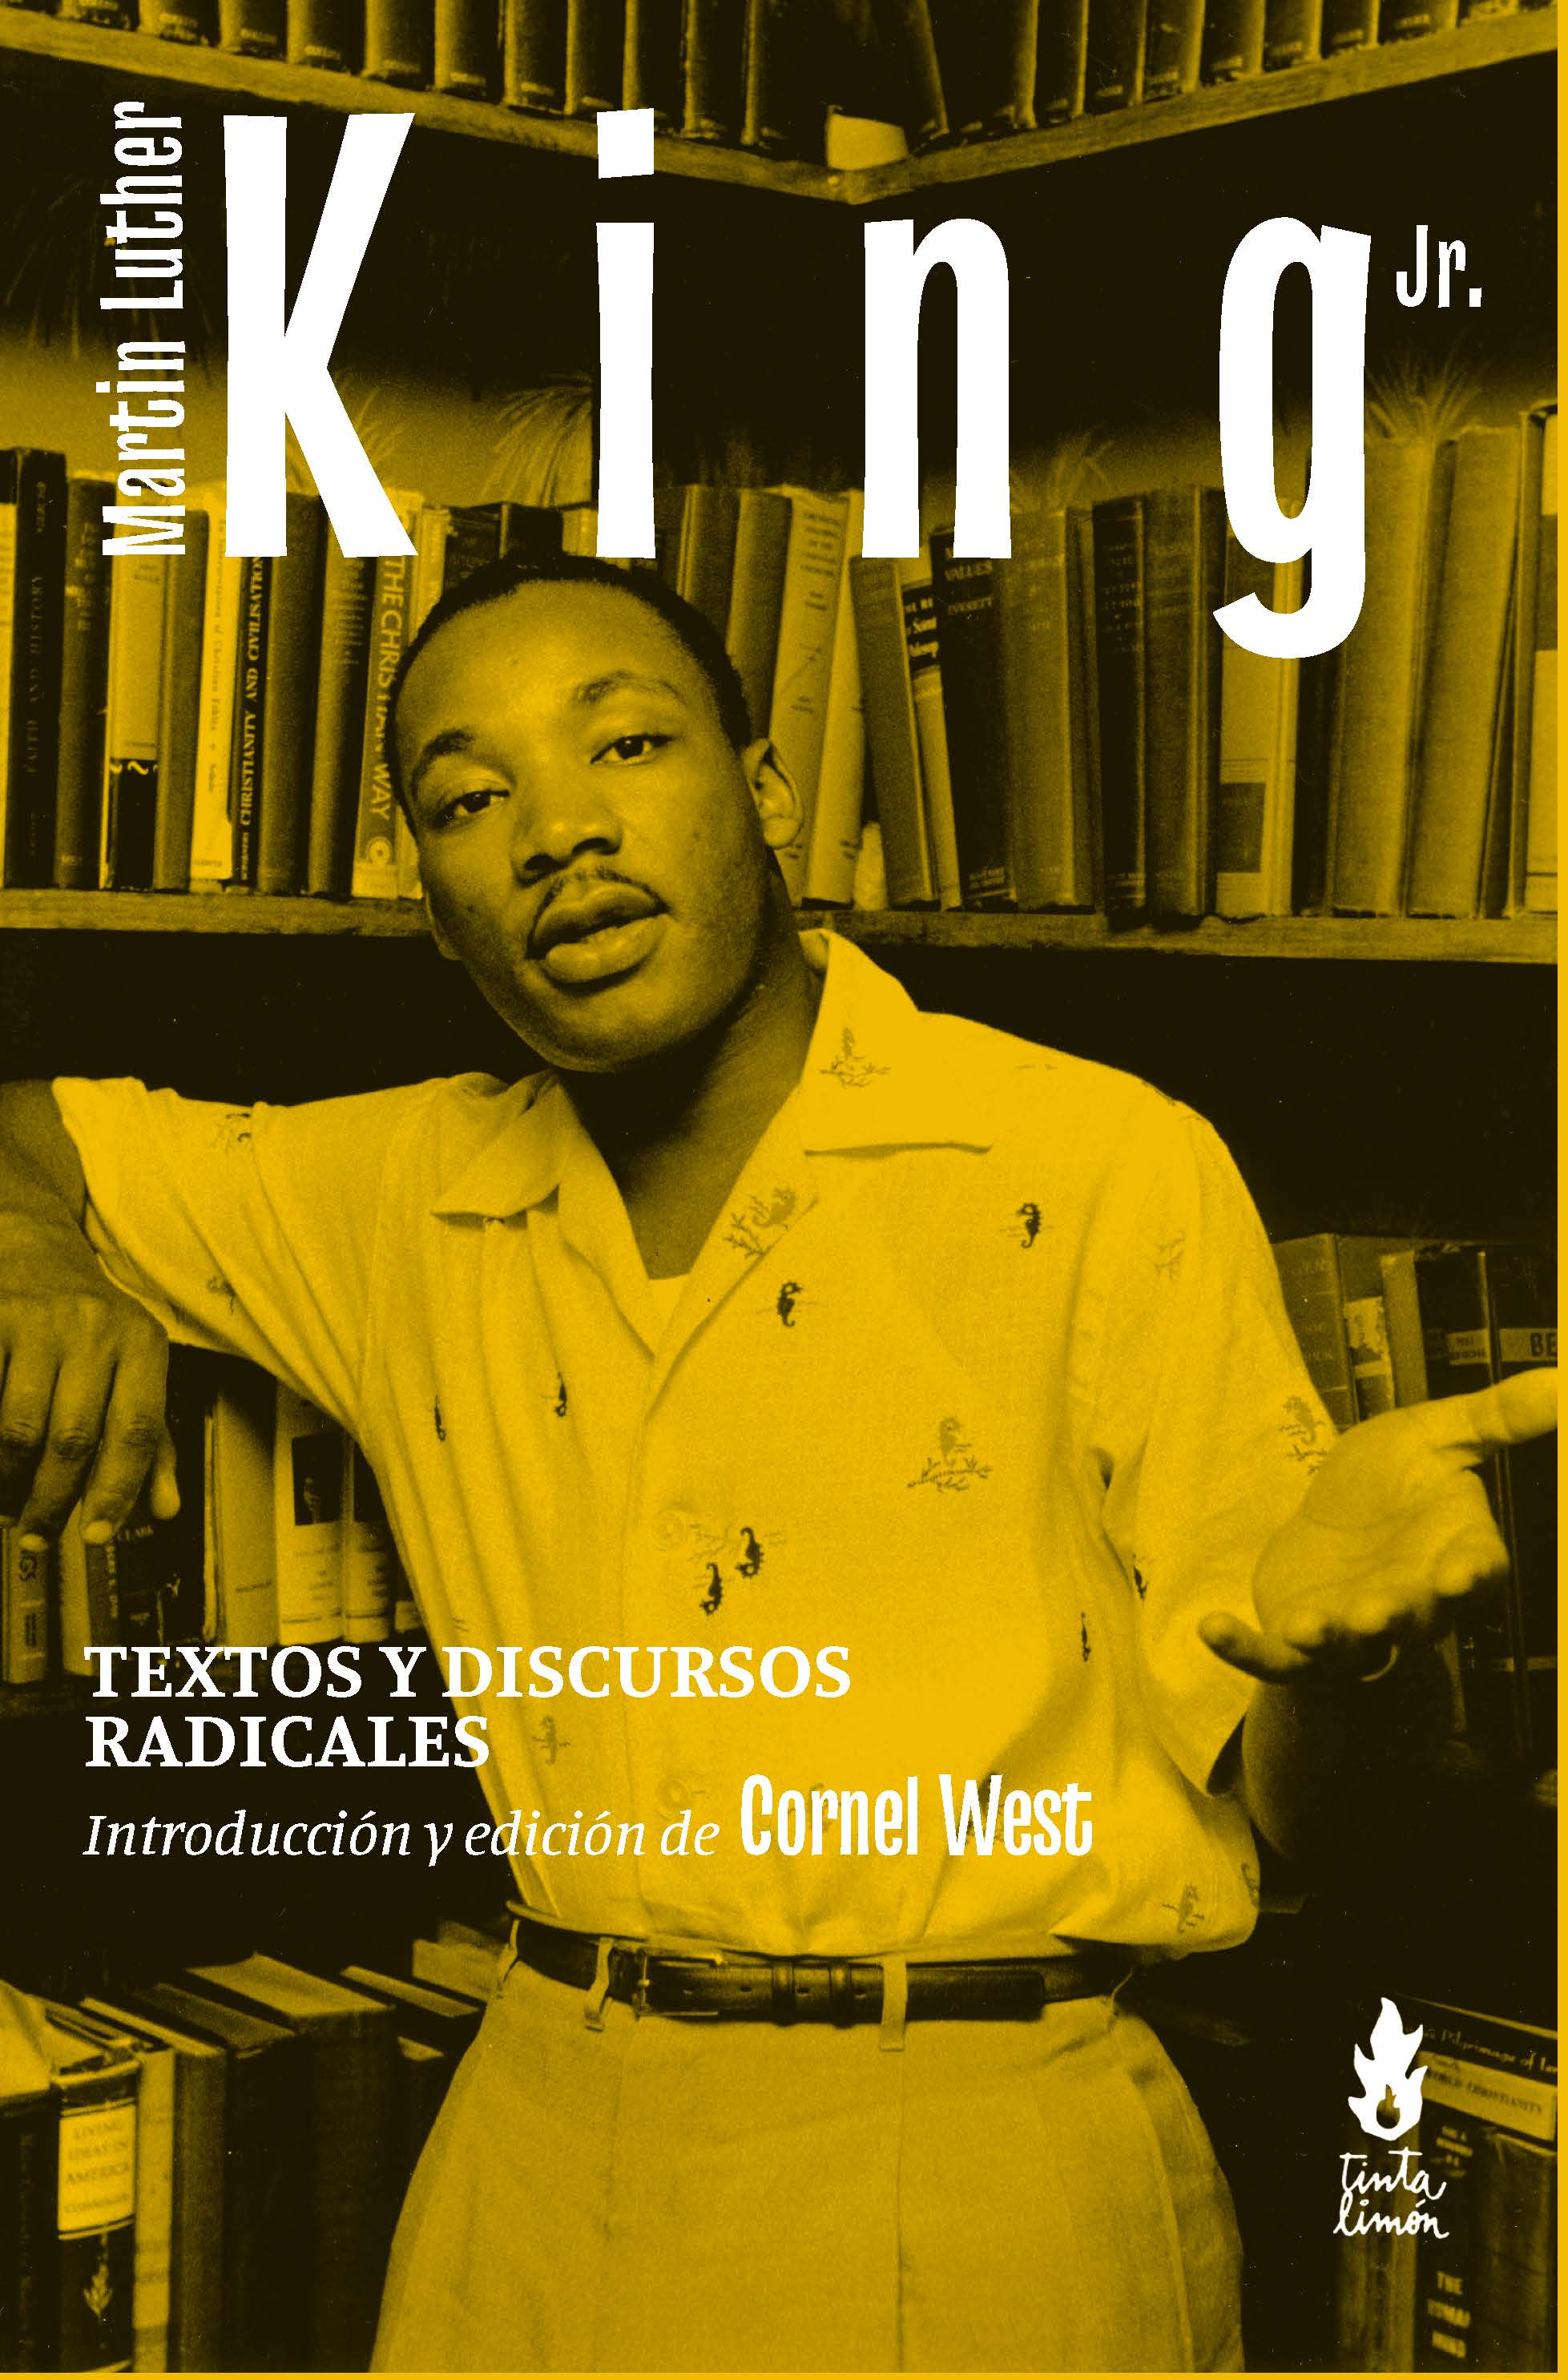 TEXTOS Y DISCURSOS RADICALES - Martin Luther King Jr. | Cornel West